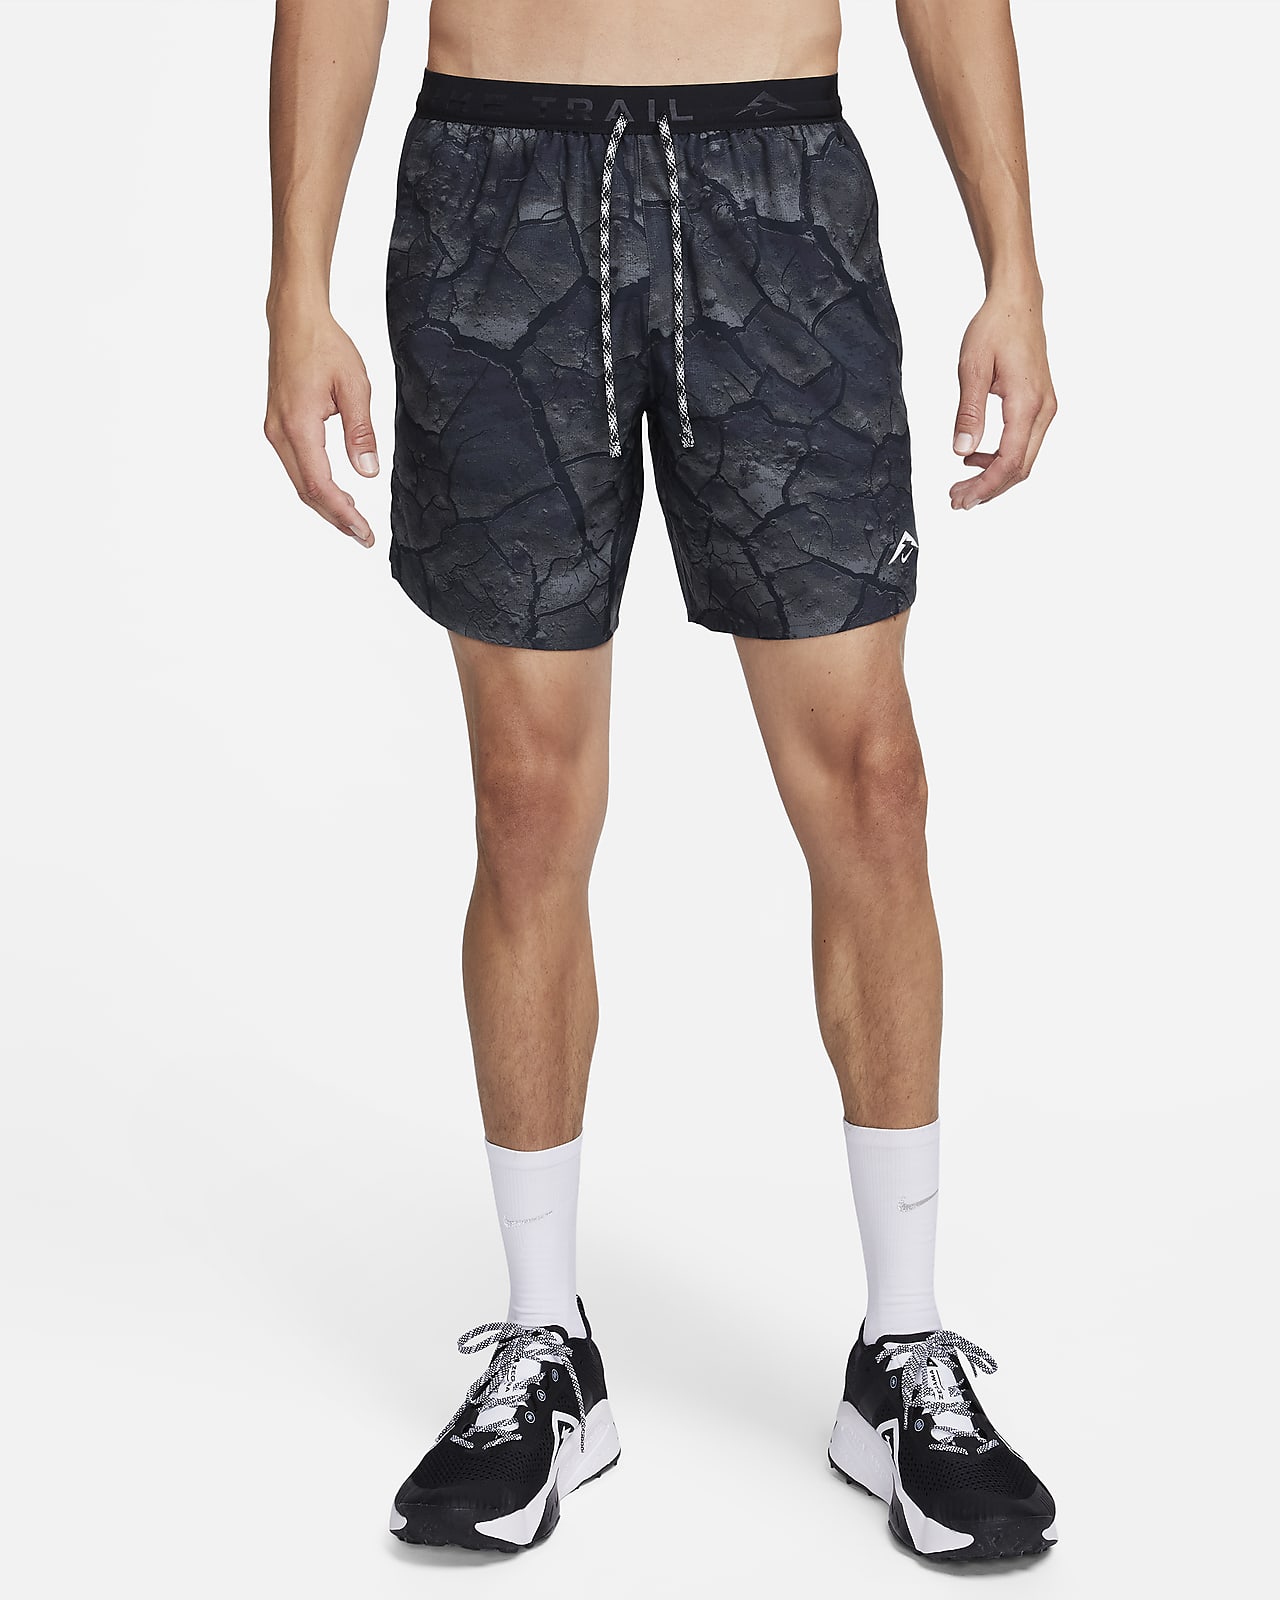 Nike Dri-FIT 7" Brief-Lined Printed Shorts.